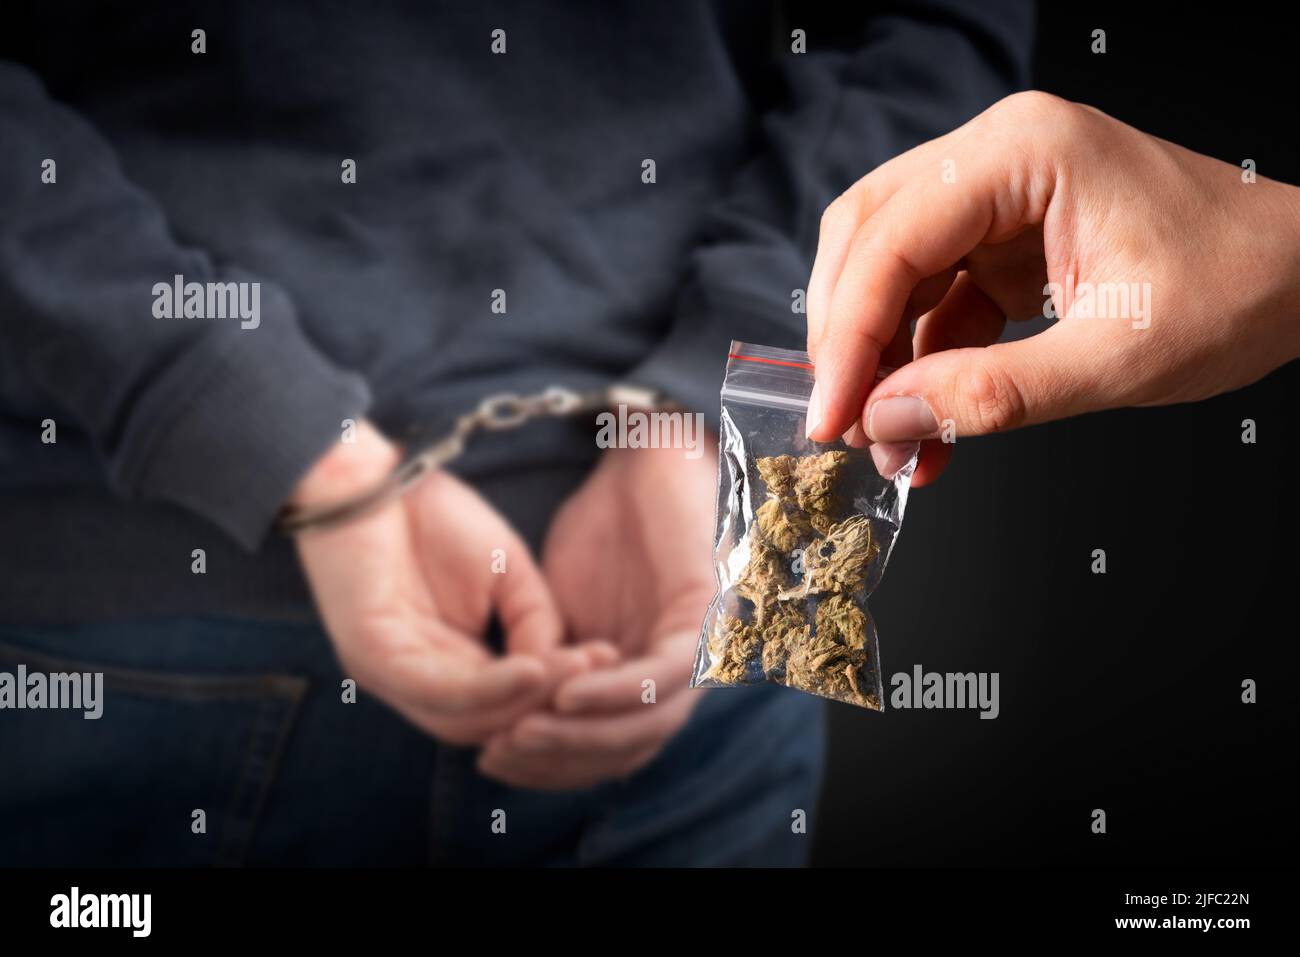 Criminal handcuffed, back view. Criminal arrested, security concept Stock Photo